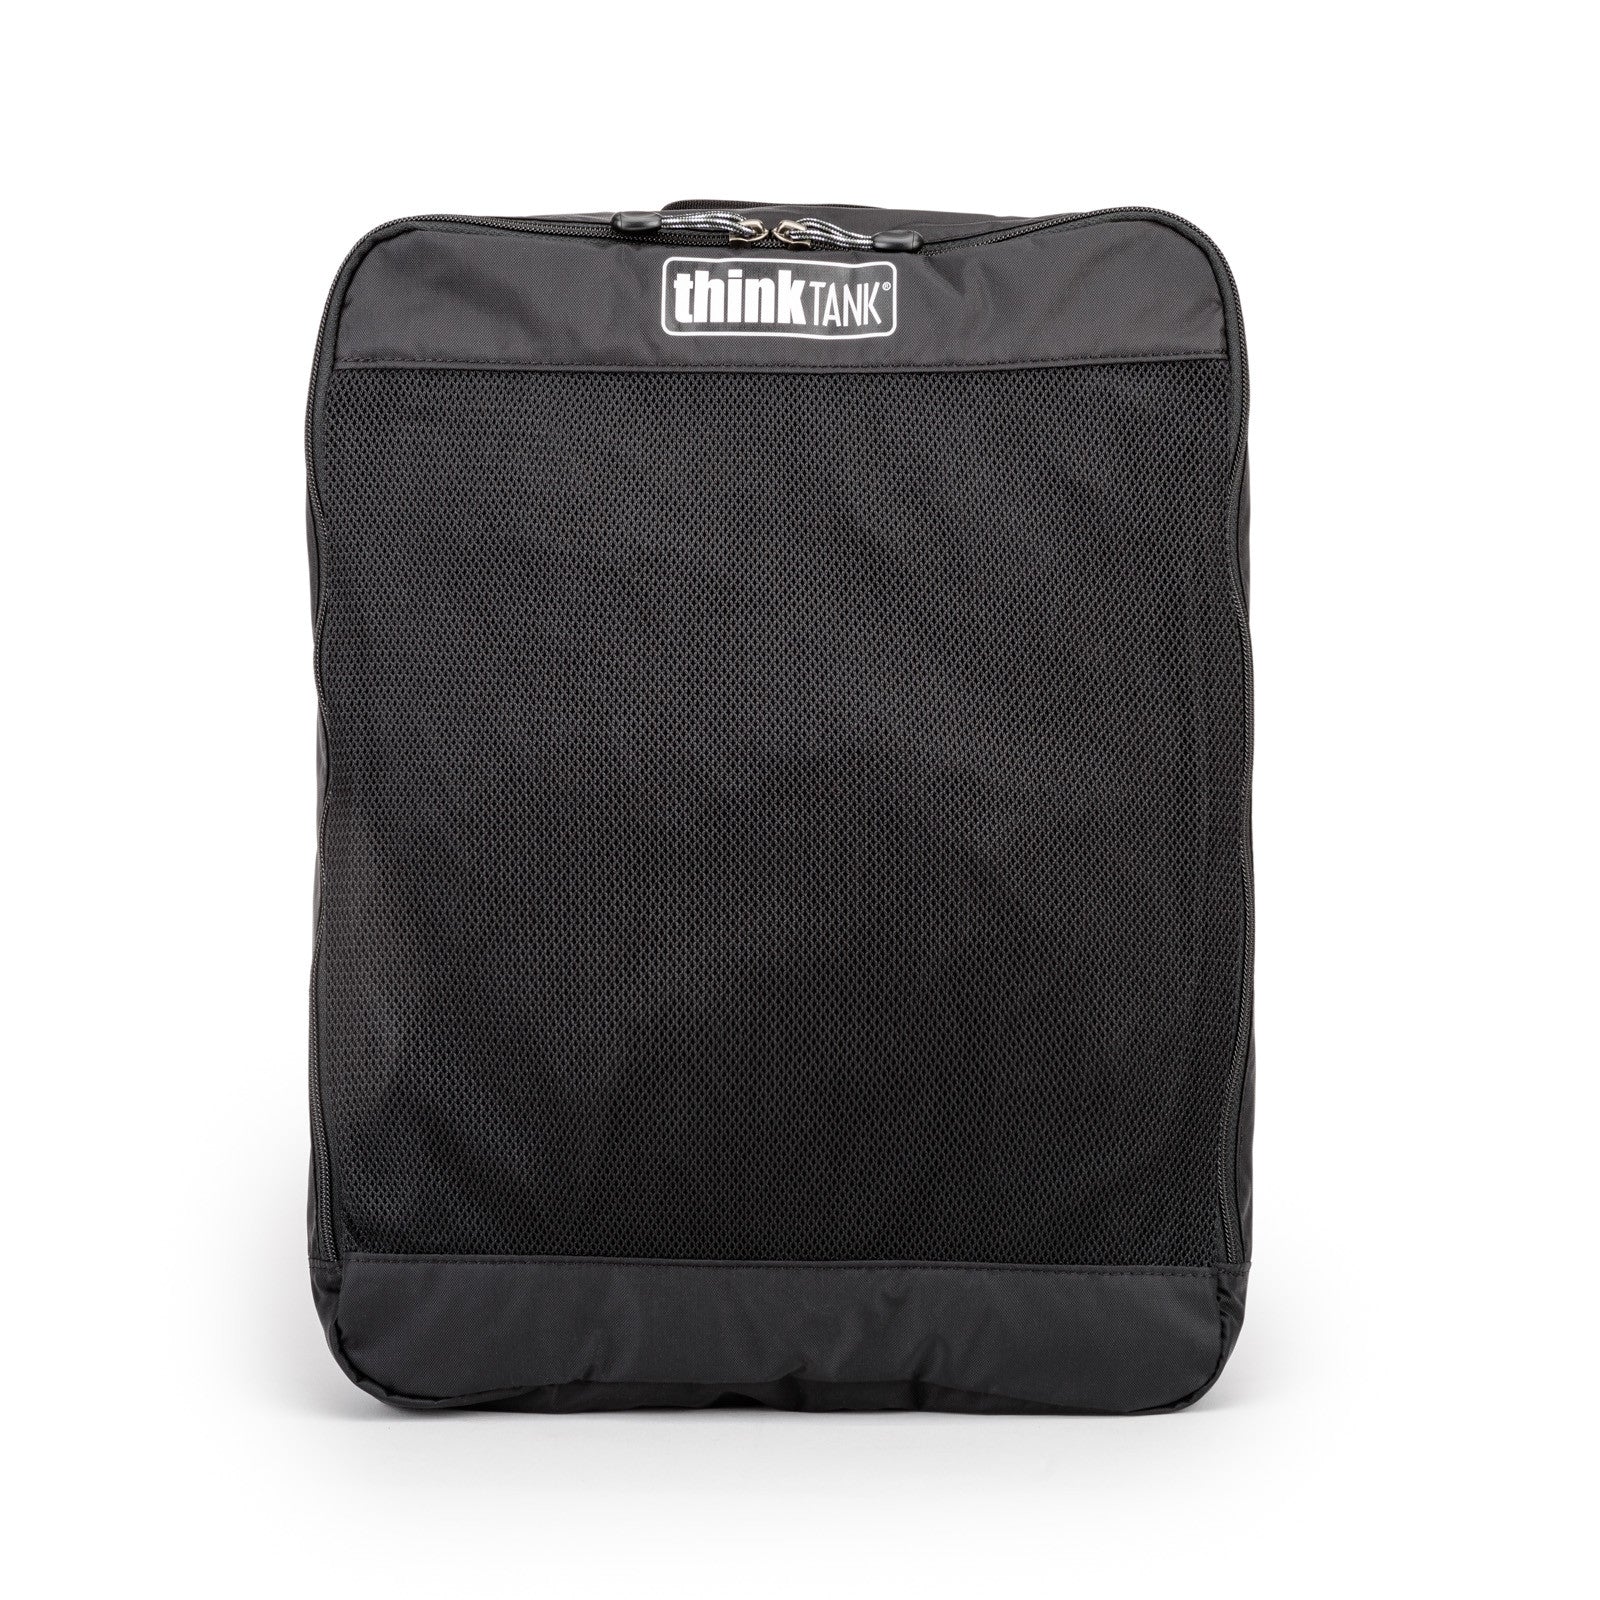 Think Tank Photo Travel Pouch - Large (Black)